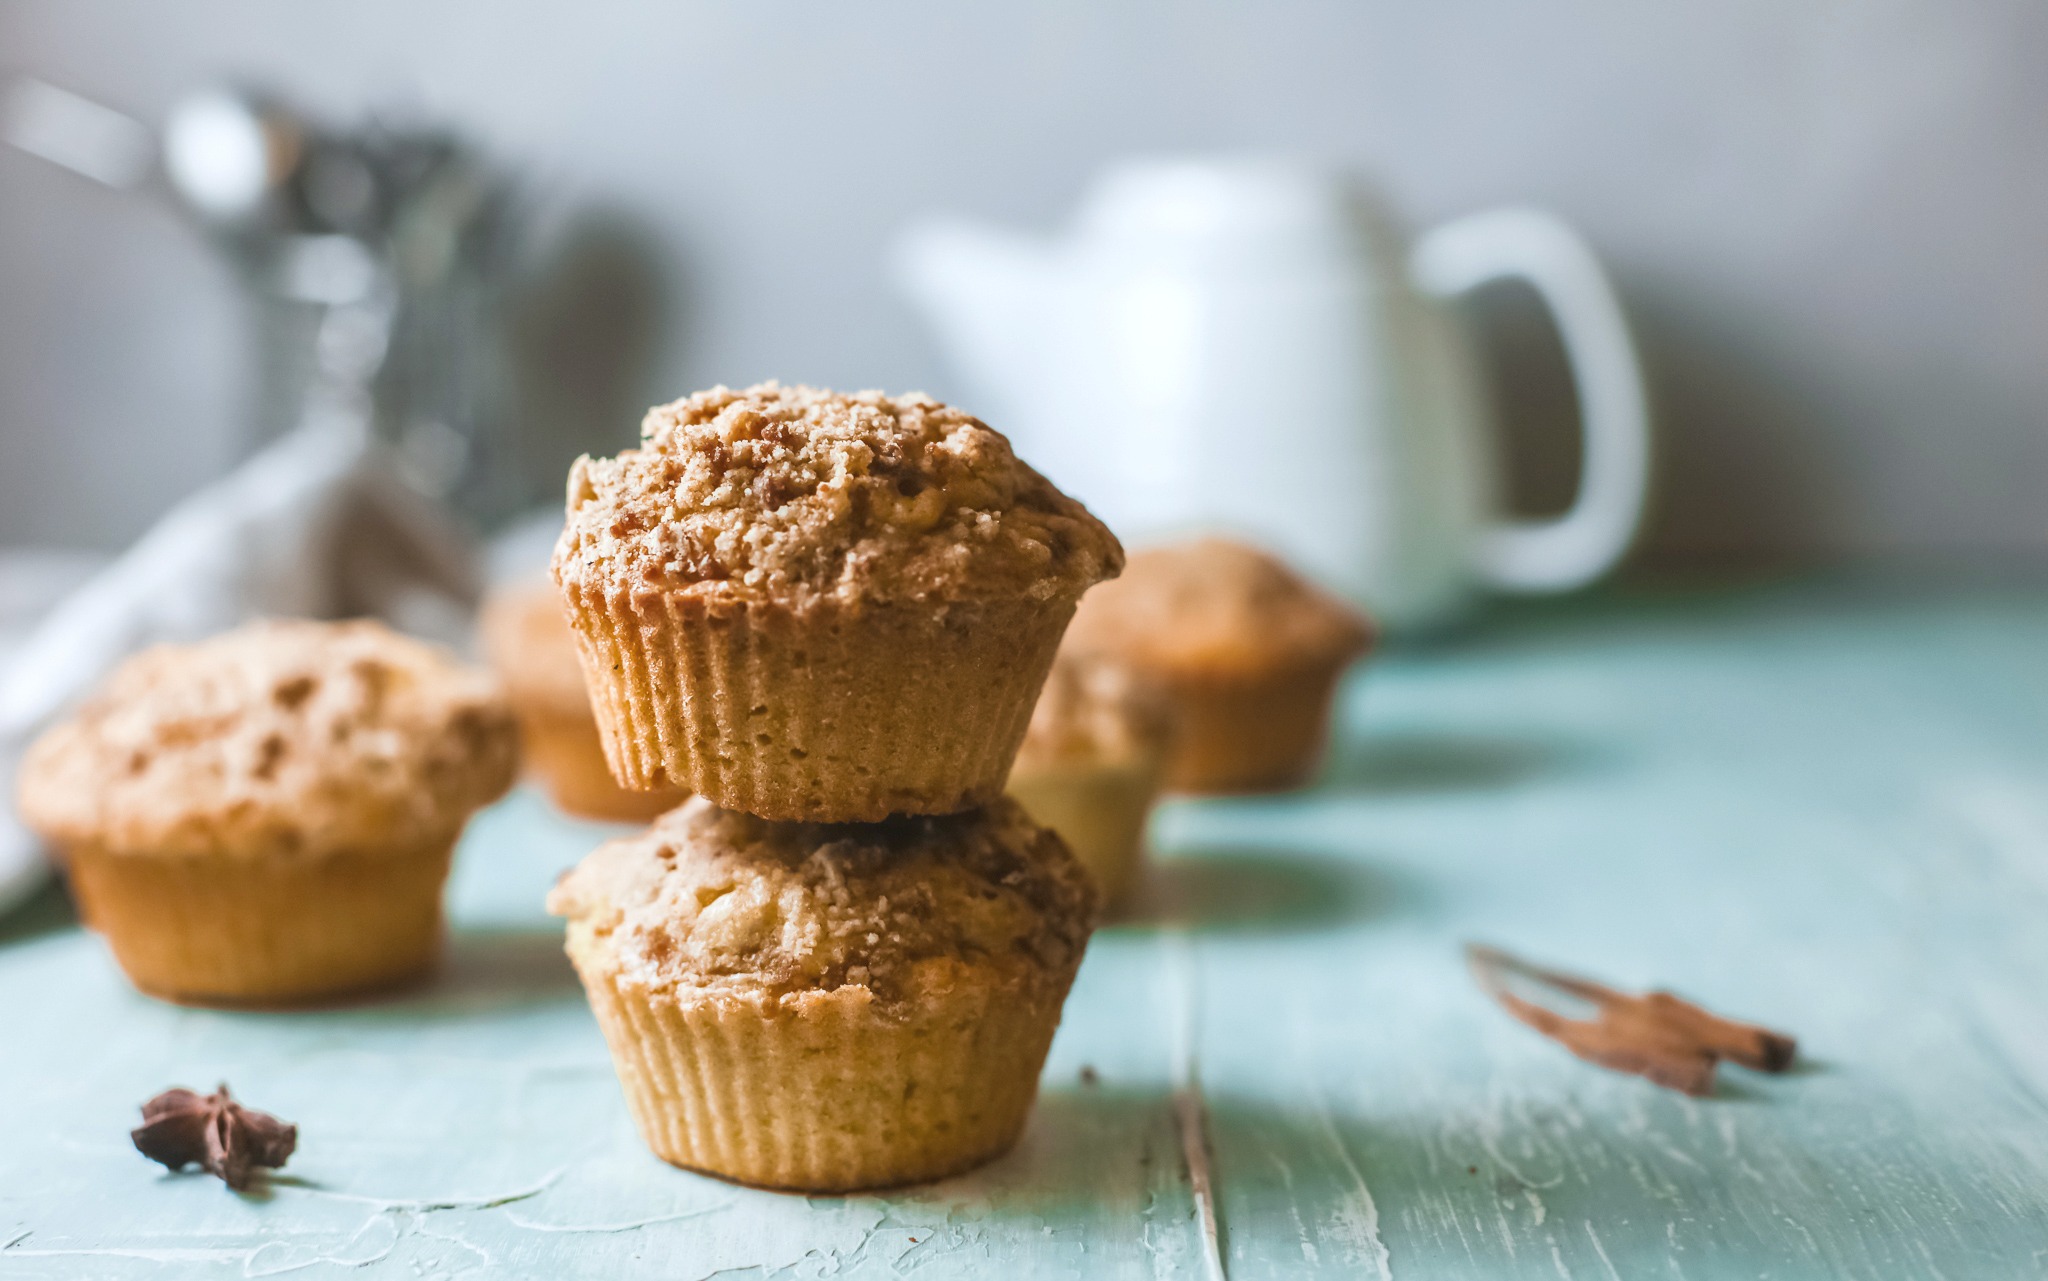 A stack of two pumpkin streusel muffins, there are more muffins behind it with a tea pot and utensils.